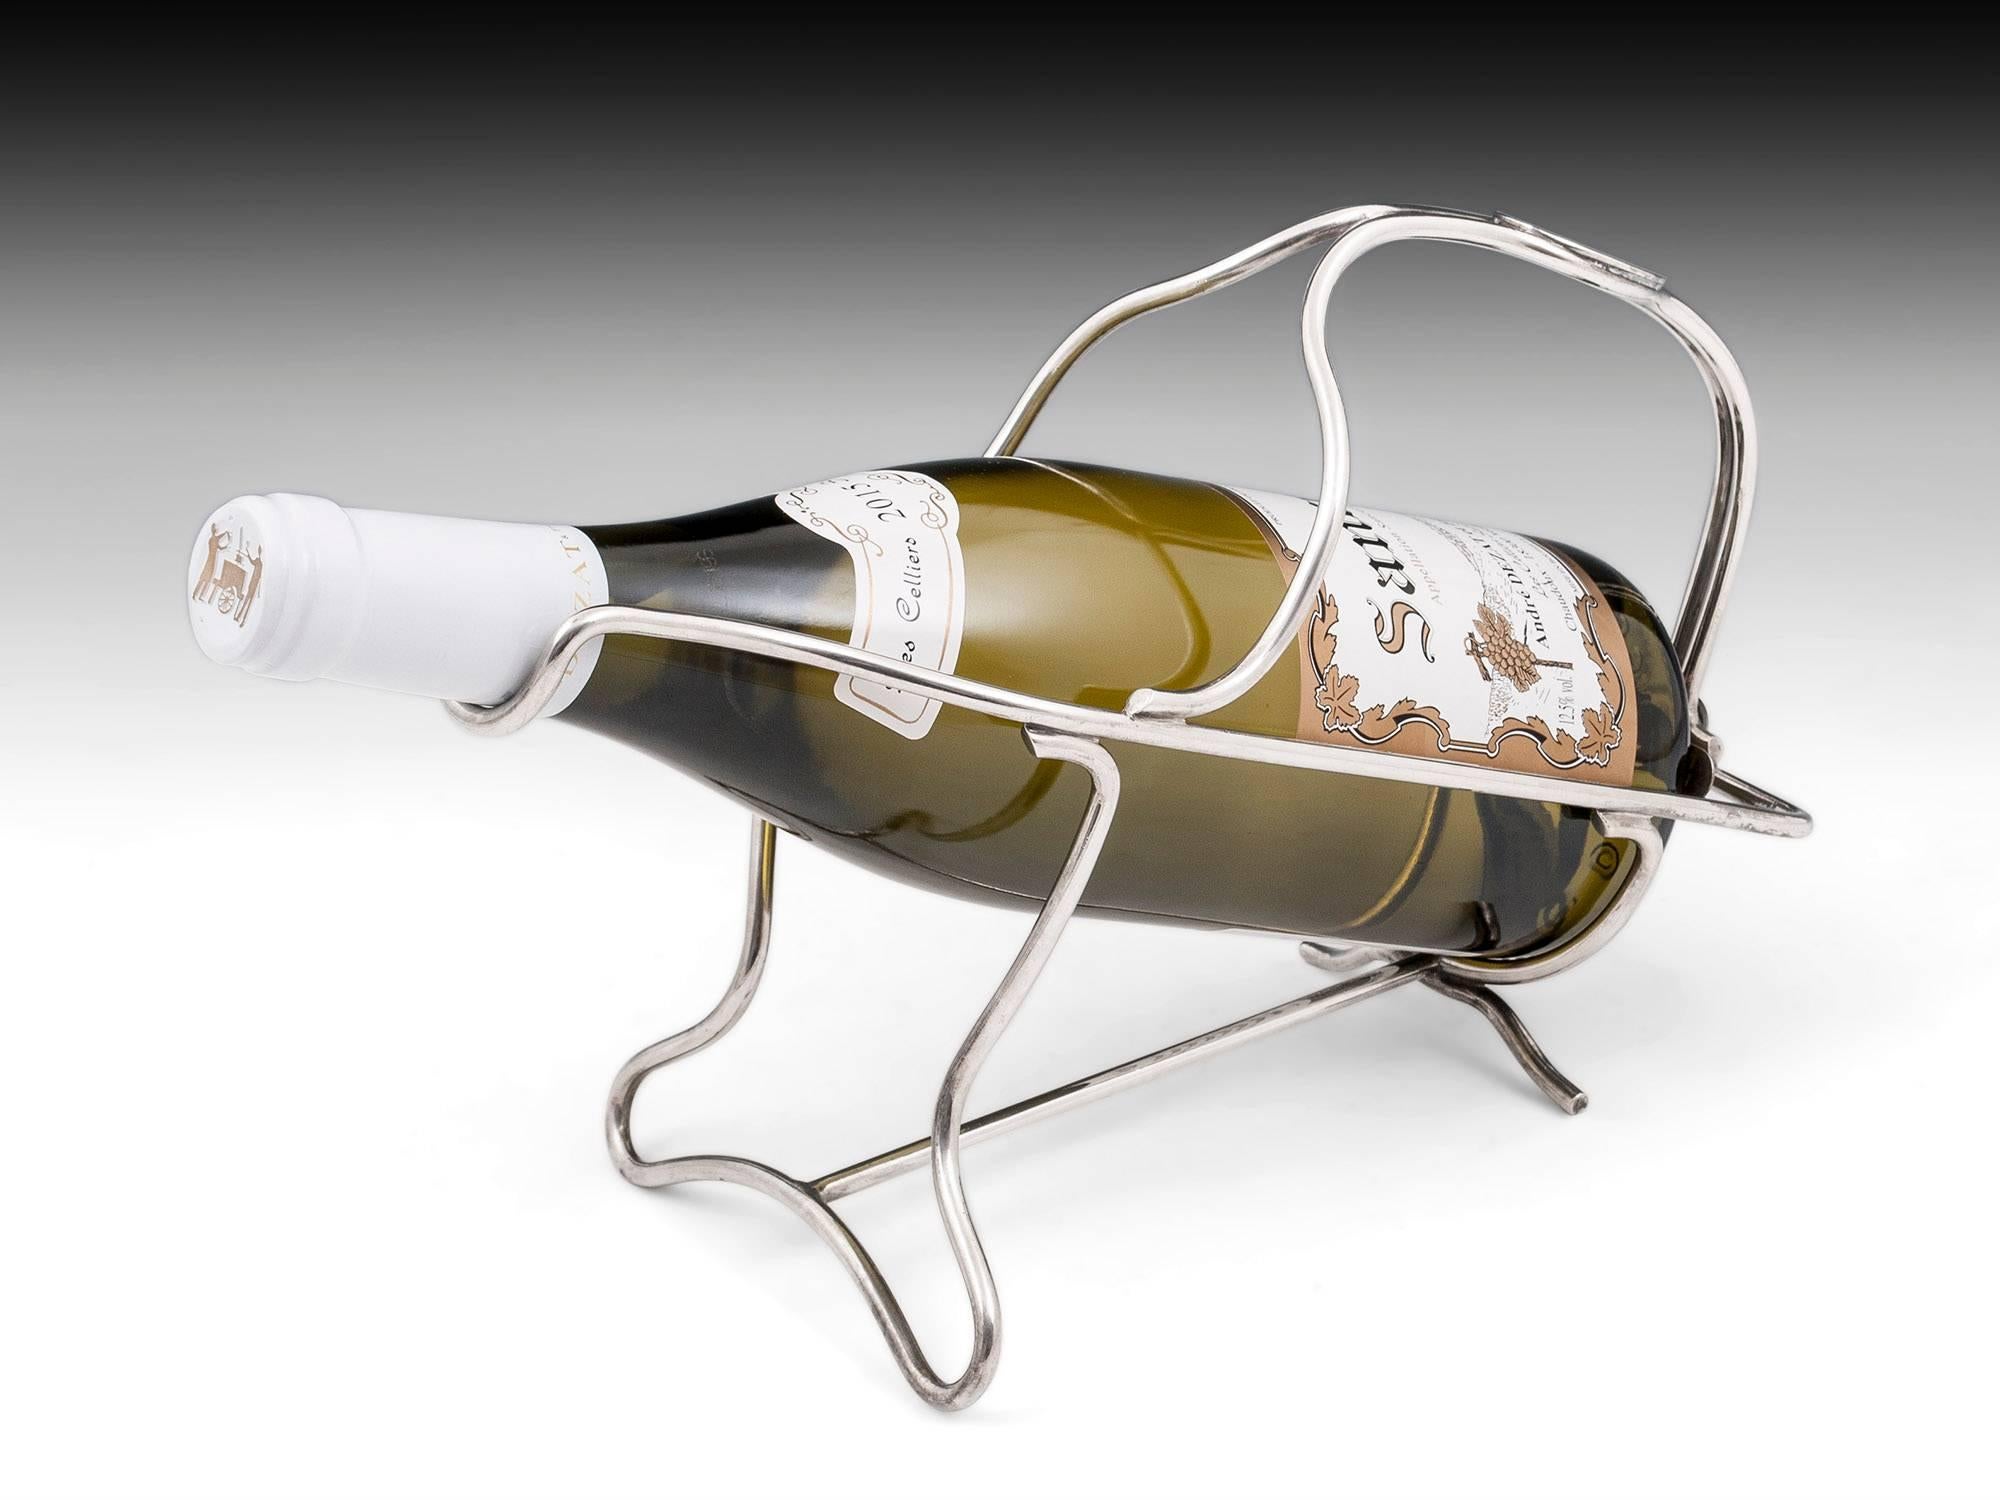 Silver plated wine pourer by French designer Christofle. The wine bottle is secured tightly within the frame by a cross spring at the back of the cradle, this makes the pouring simple, easy and with out the worry of the wine moving within in the